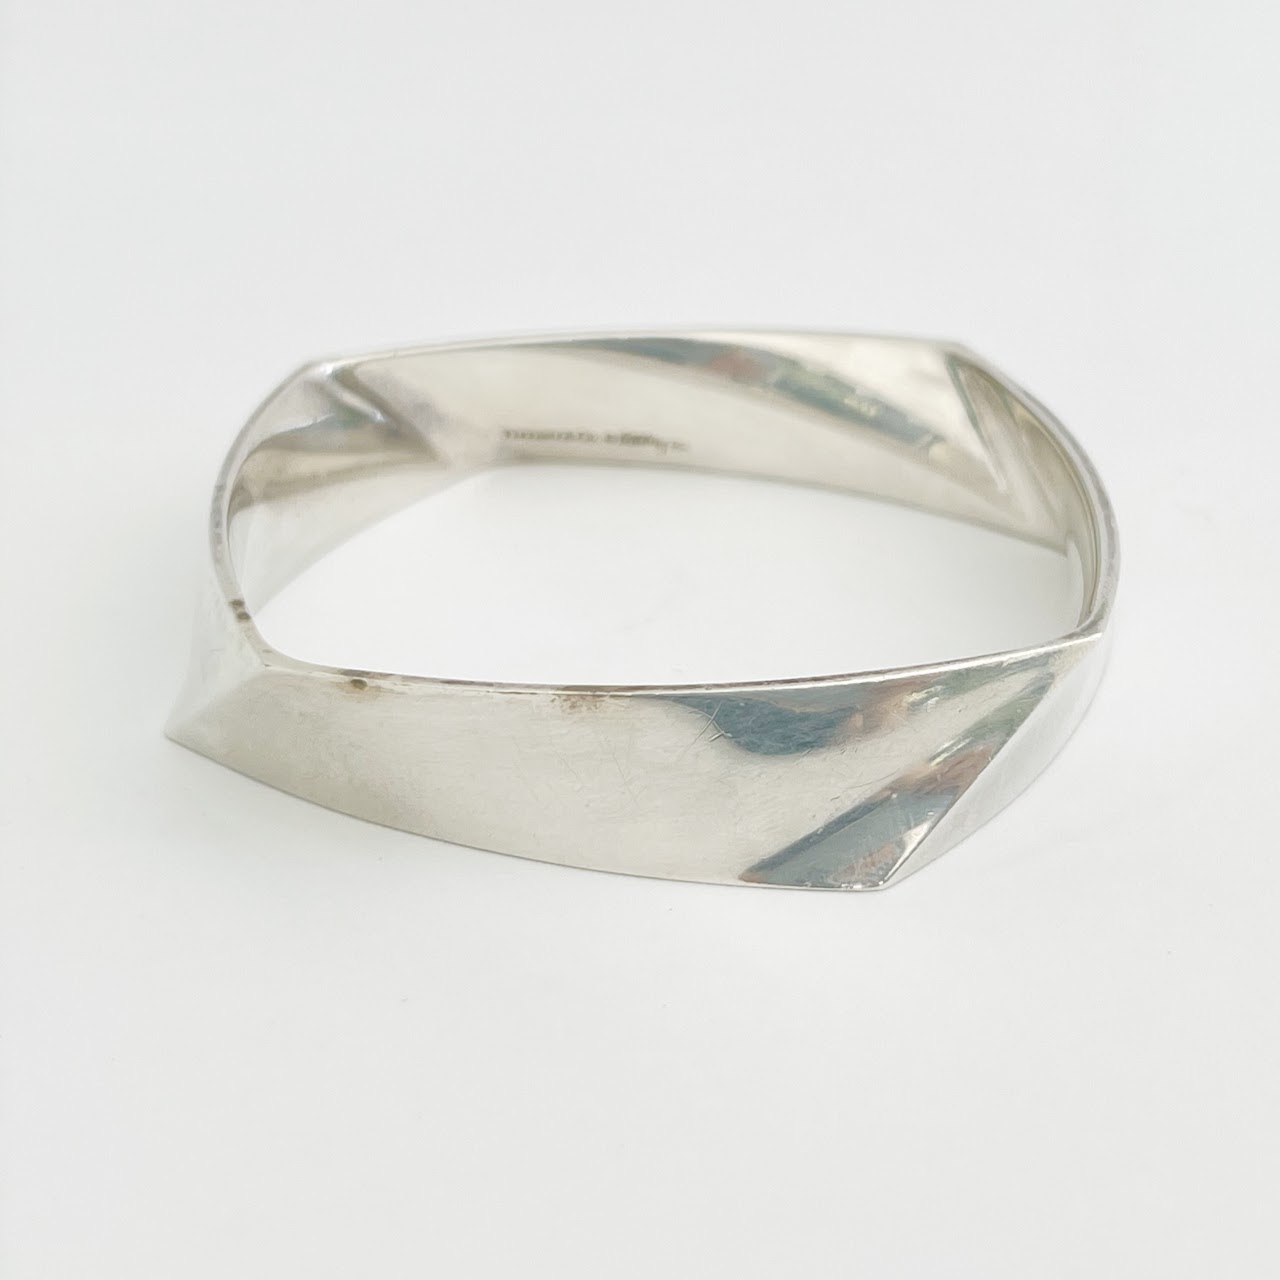 Tiffany & Co. X Frank Gehry Sterling Silver Torque Bangle Bracelet